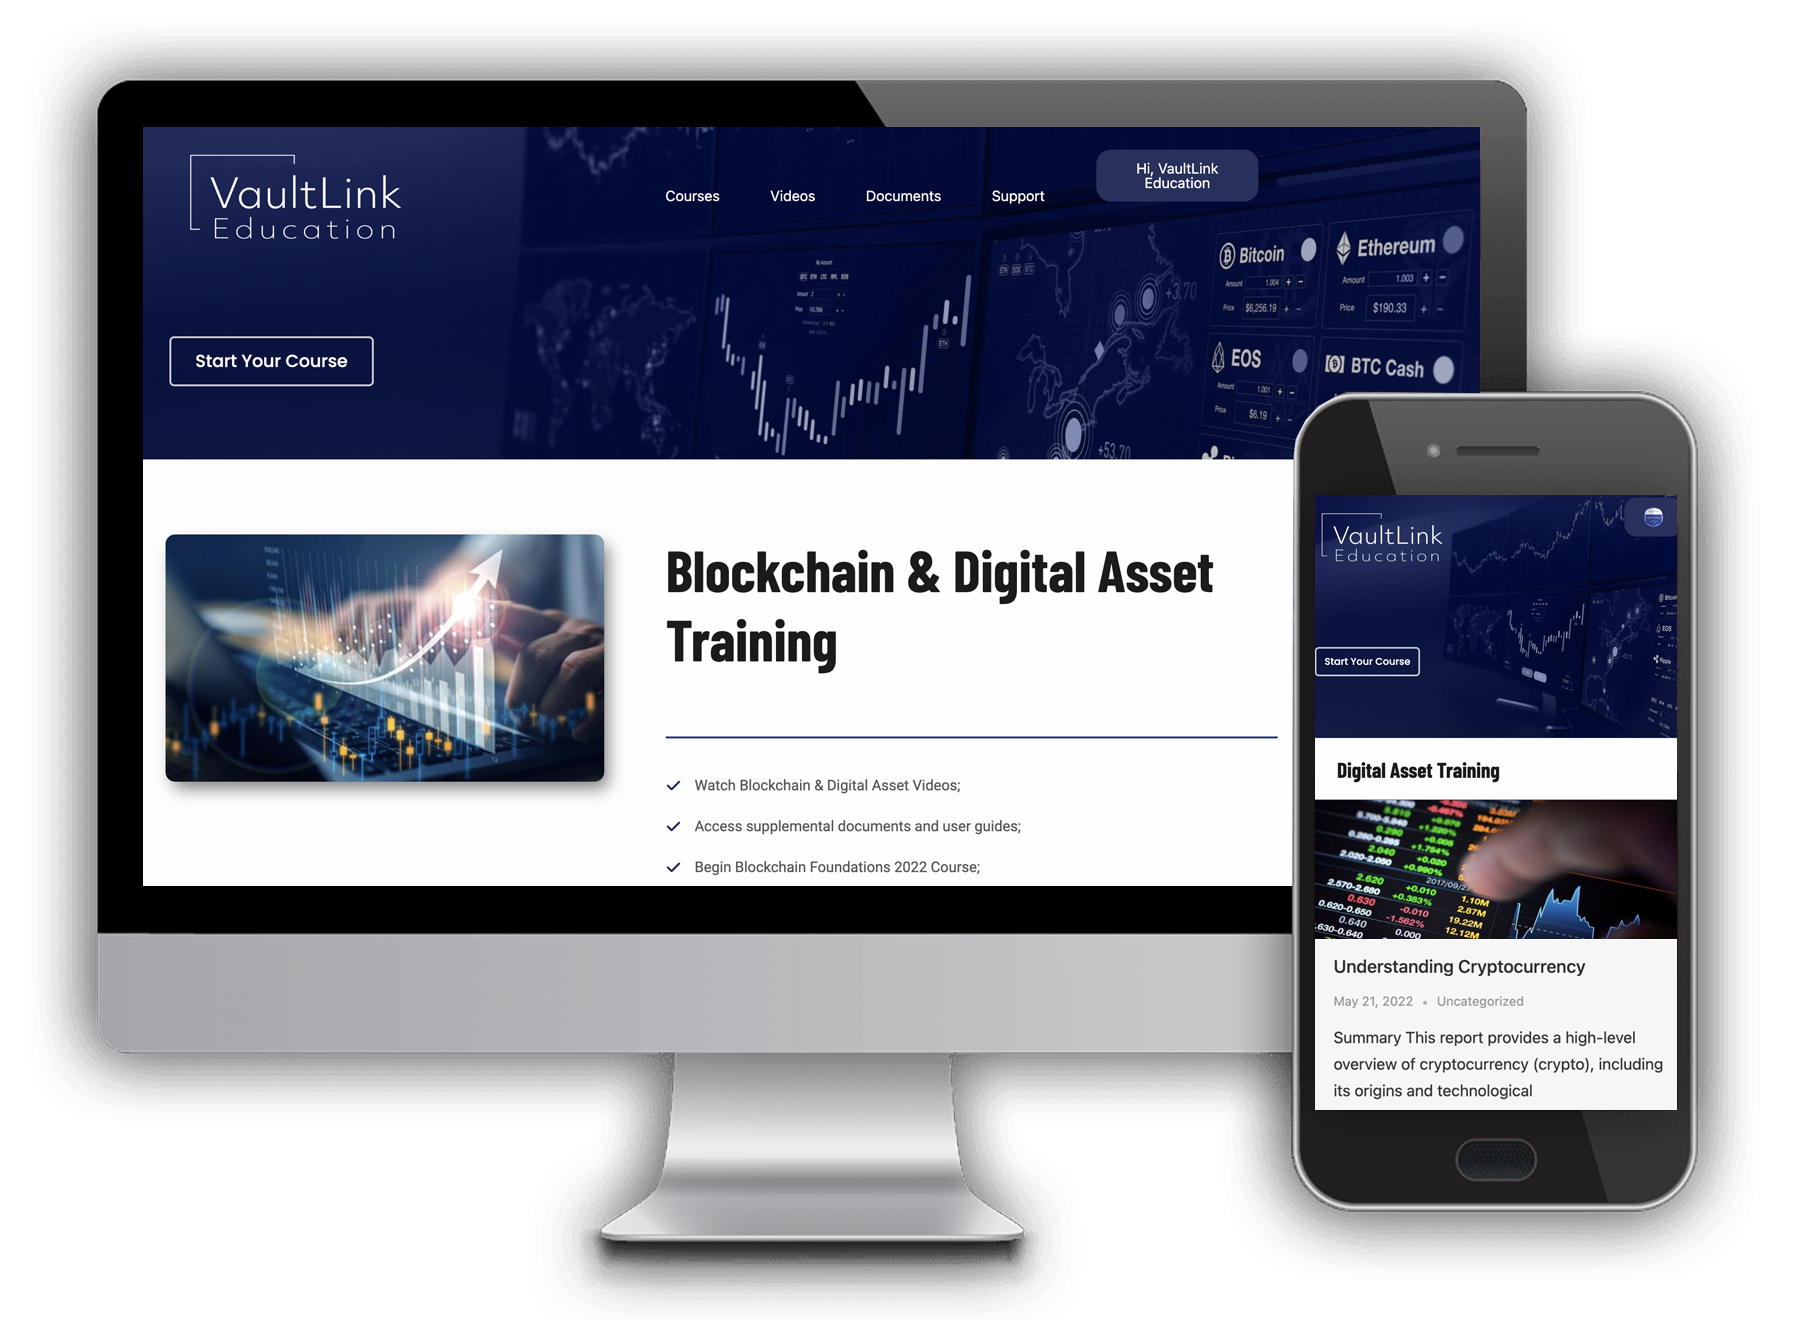 VaultLink Education - WorldClassCryptocurrency Technology and Digital Asset Training for the Banking Sector